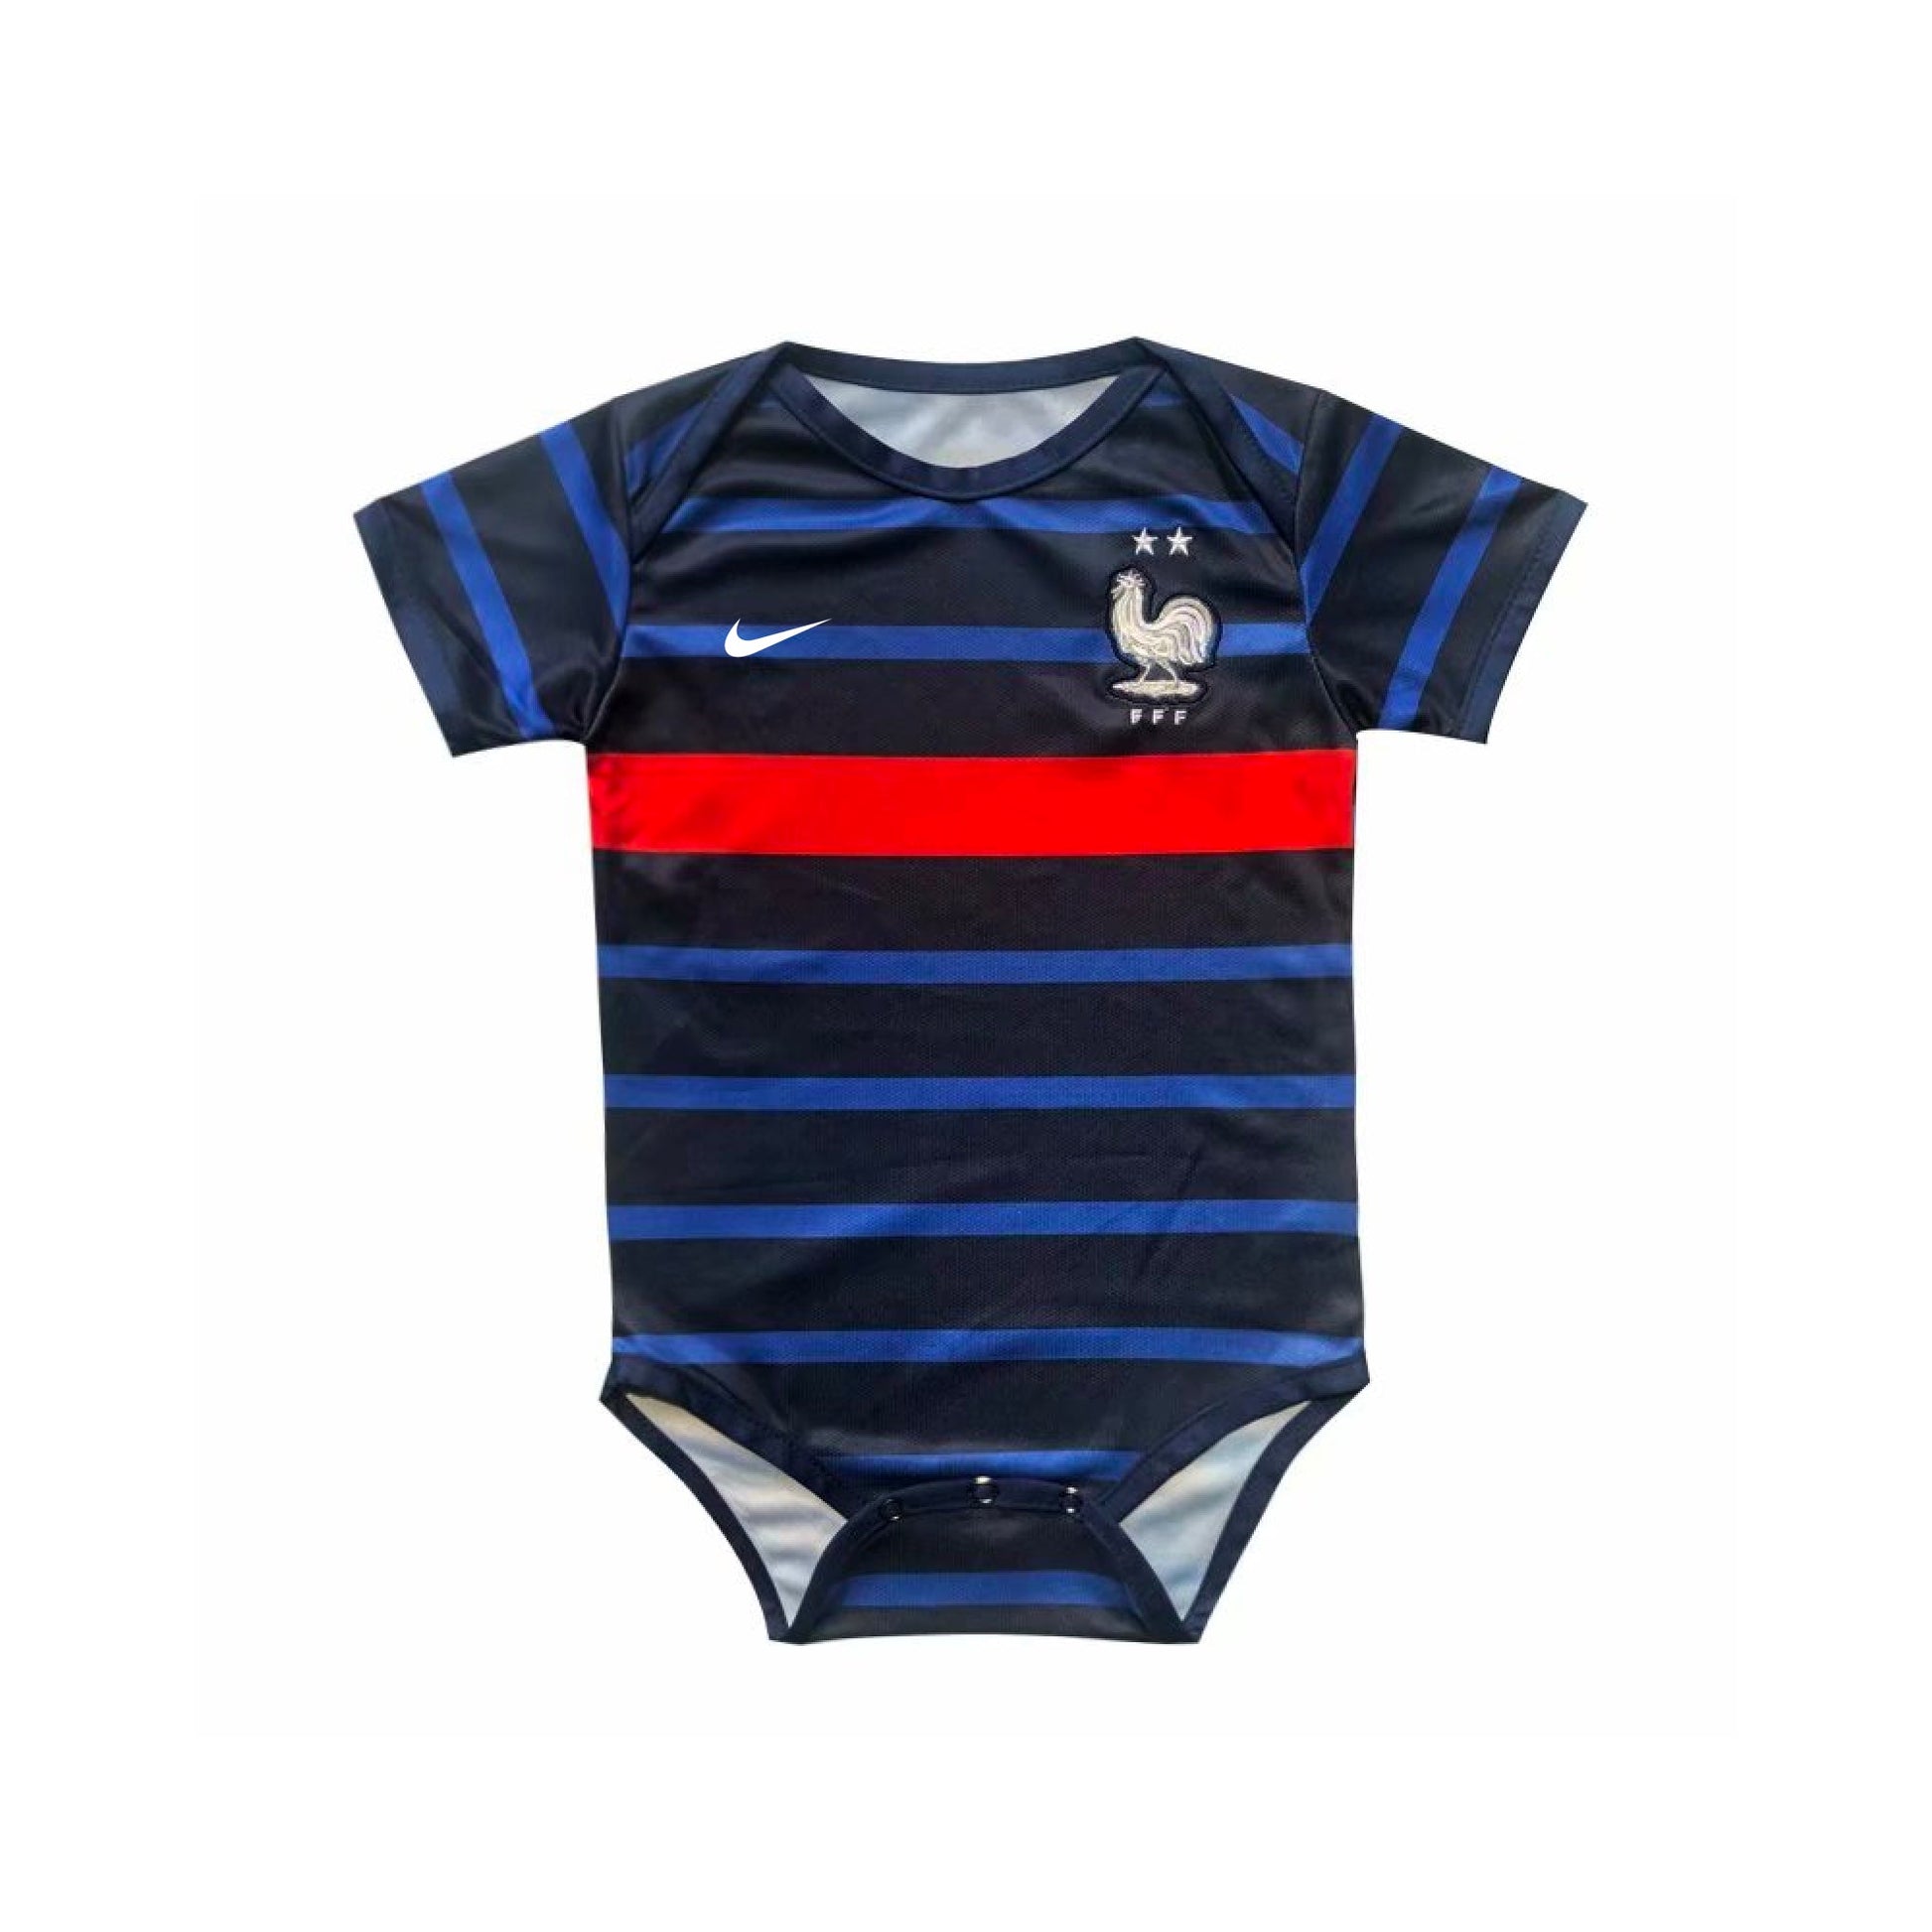 France Home Baby Jersey 2020-21 - Mitani Store